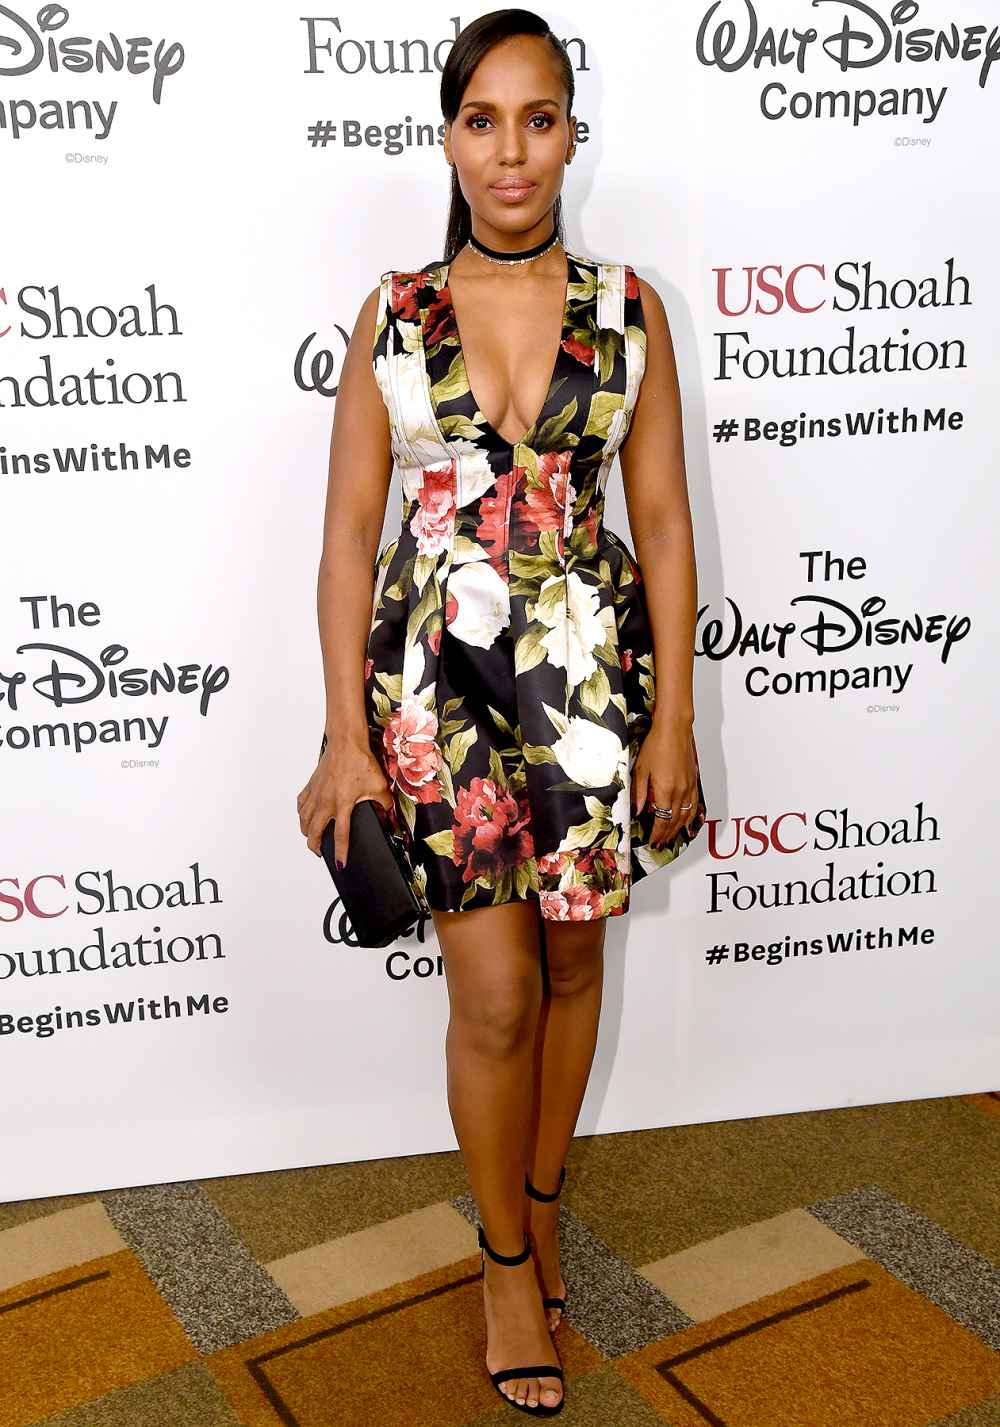 Kerry Washington attends Ambassadors for Humanity Gala Benefiting USC Shoah Foundation at the Ray Dolby Ballroom at Hollywood & Highland Center on December 8, 2016 in Hollywood, California.